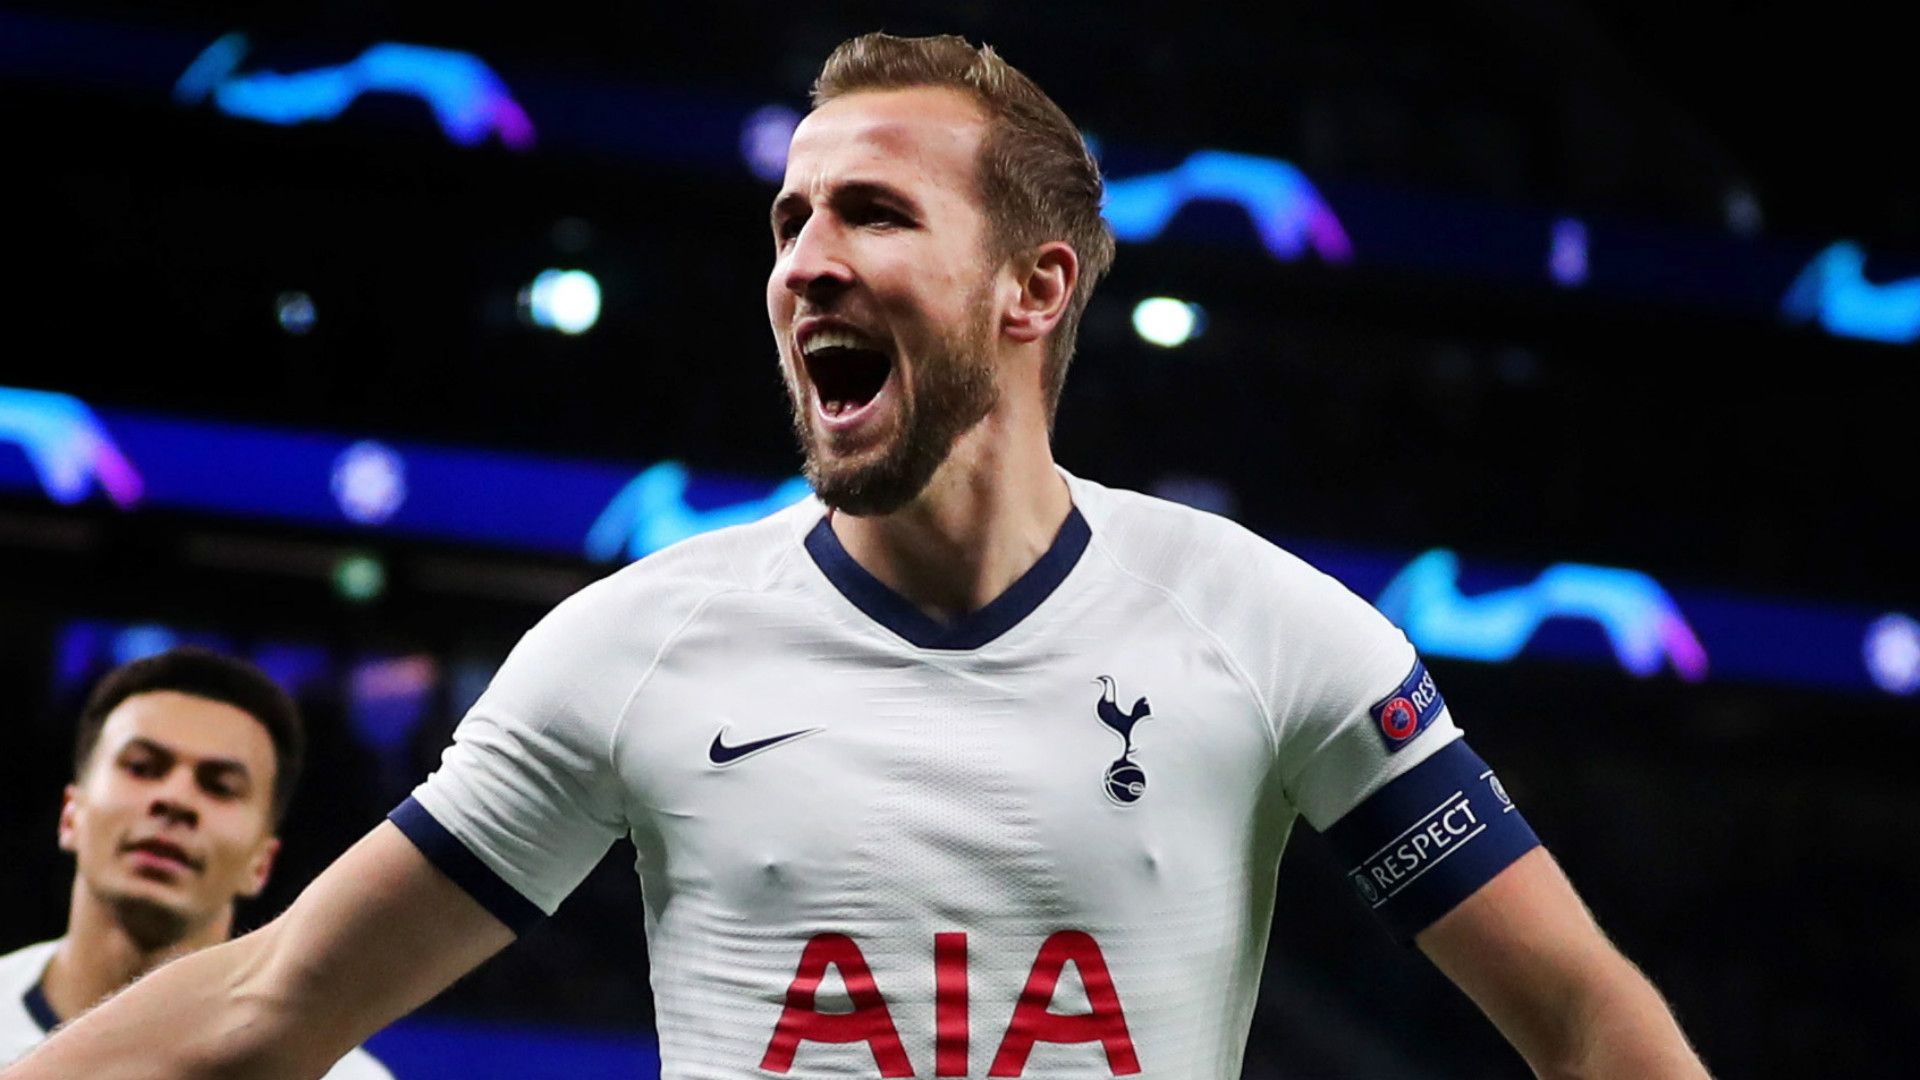 Kane would have Manchester United challenging for Premier League in 2021'